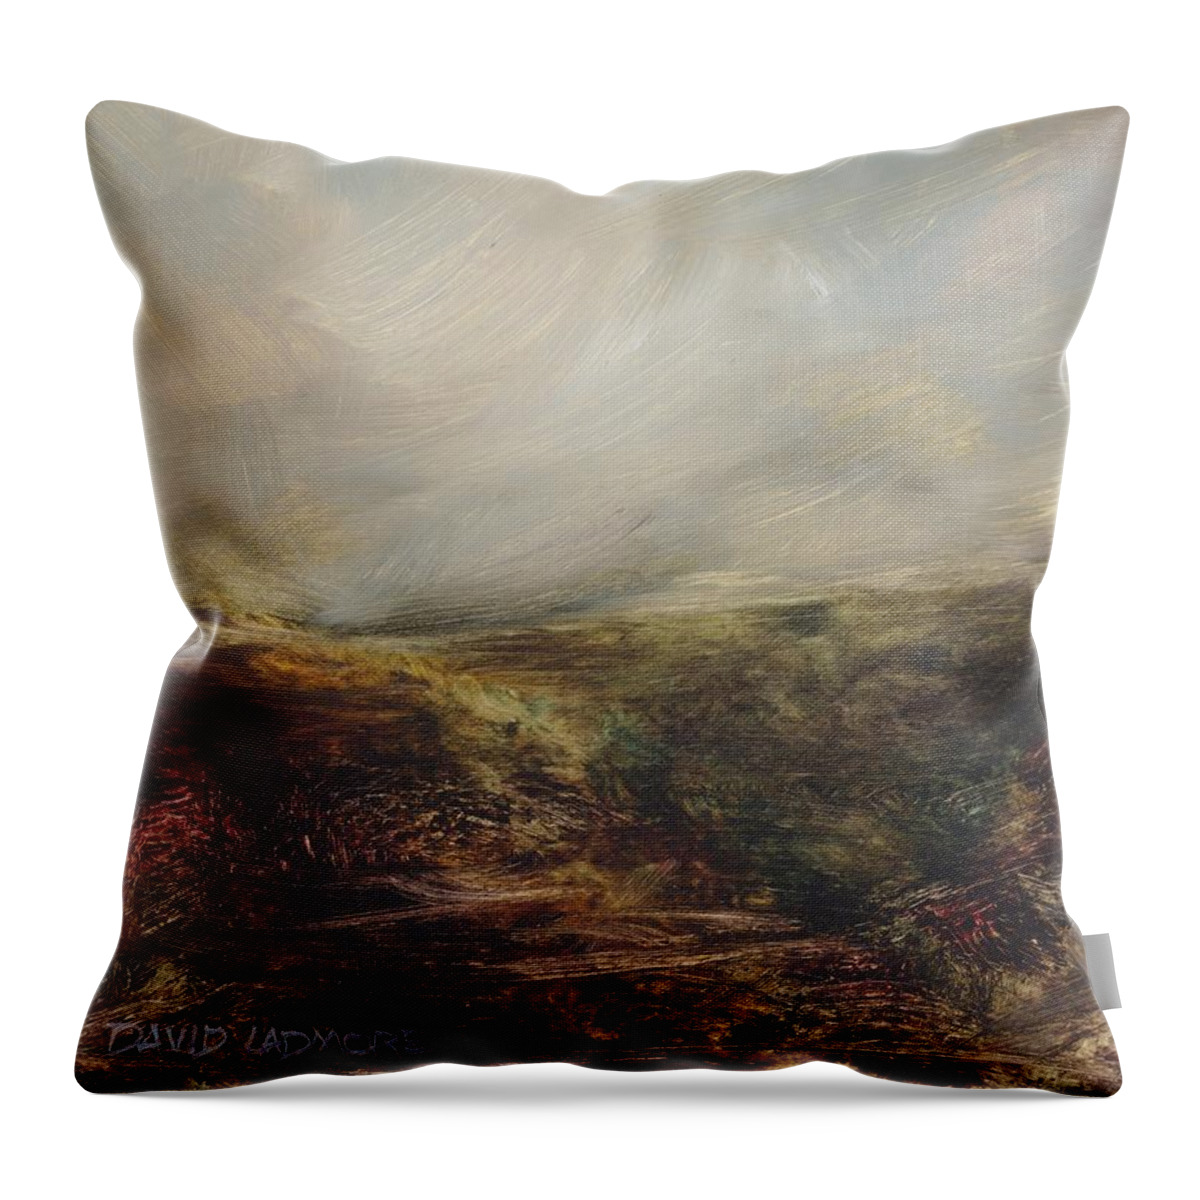 Moorland Throw Pillow featuring the painting Moorland 76 by David Ladmore